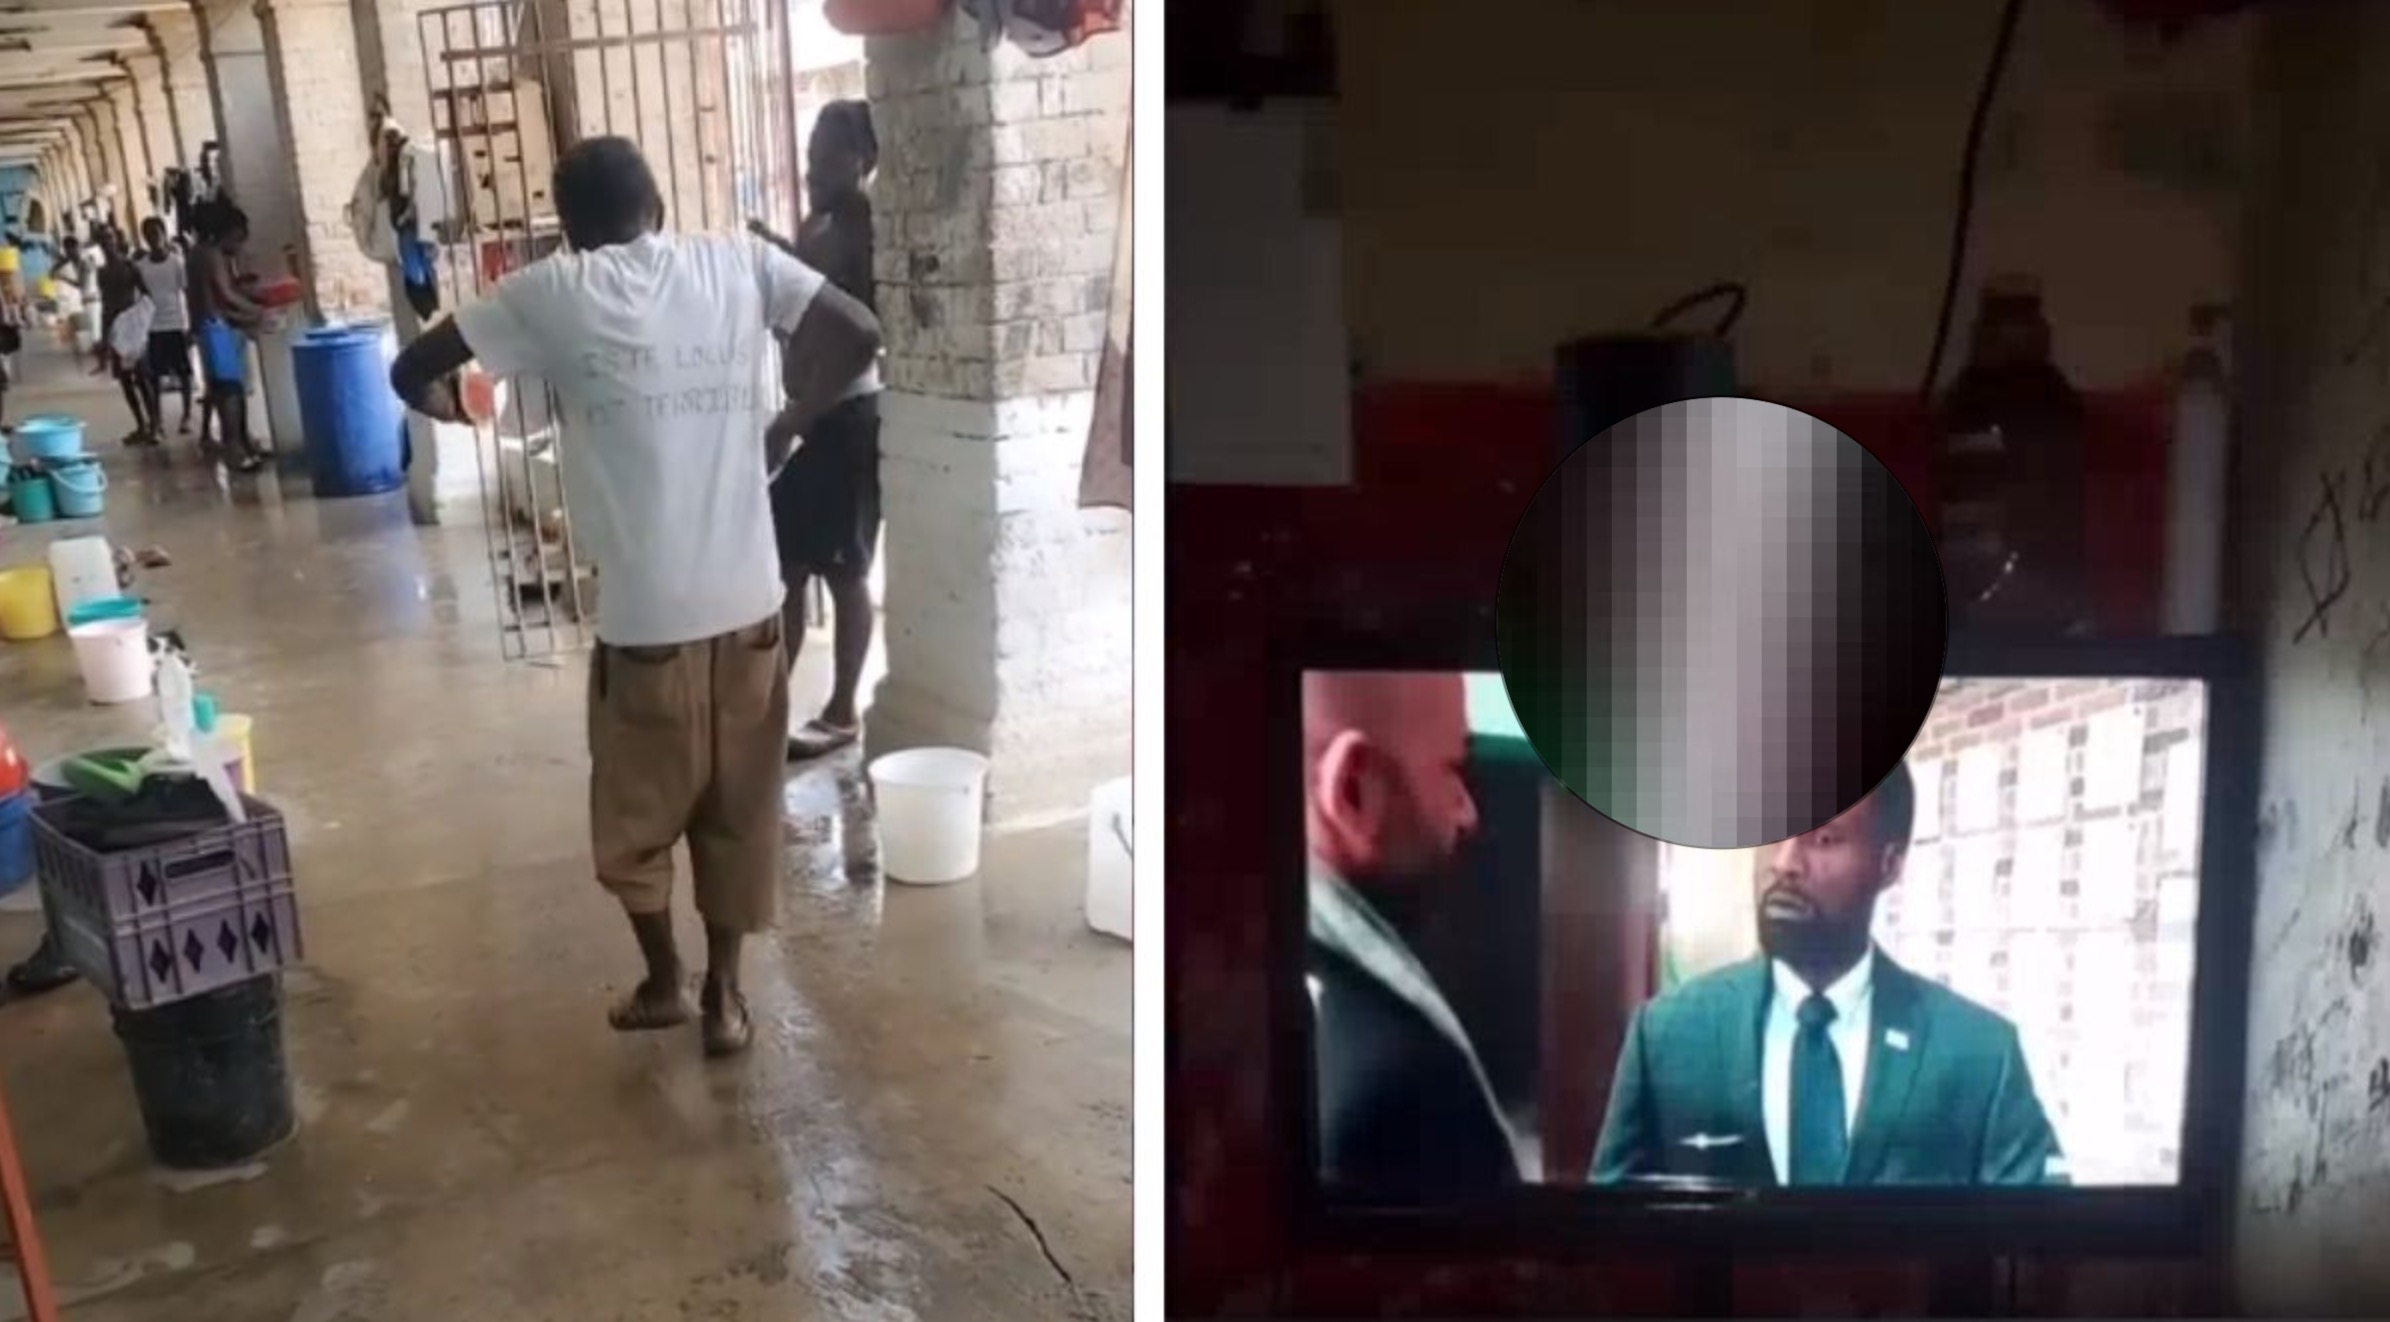 Prisoners go Viral after Dancing to a Mavado Song in Lockup and Showing Off a TV - Watch Videos